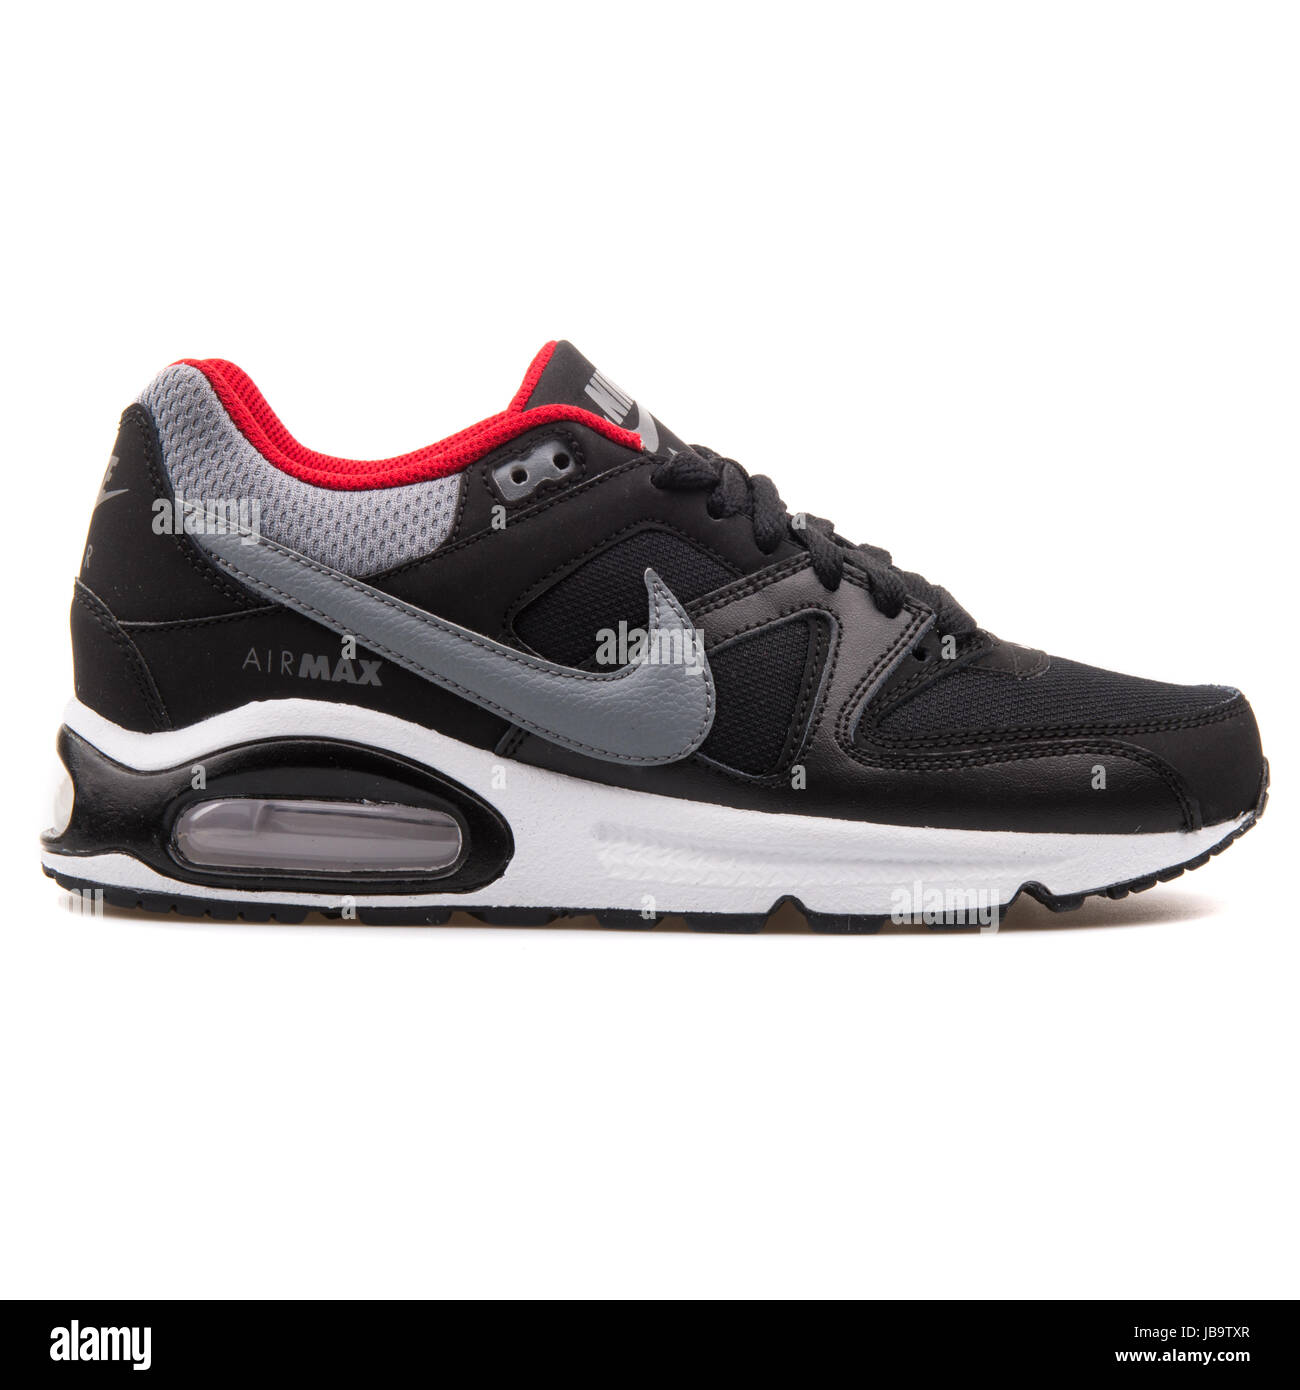 Nike Air Max Command (GS) Black, Grey and Red Youth's Sports Sneakers -  407759-065 Stock Photo - Alamy